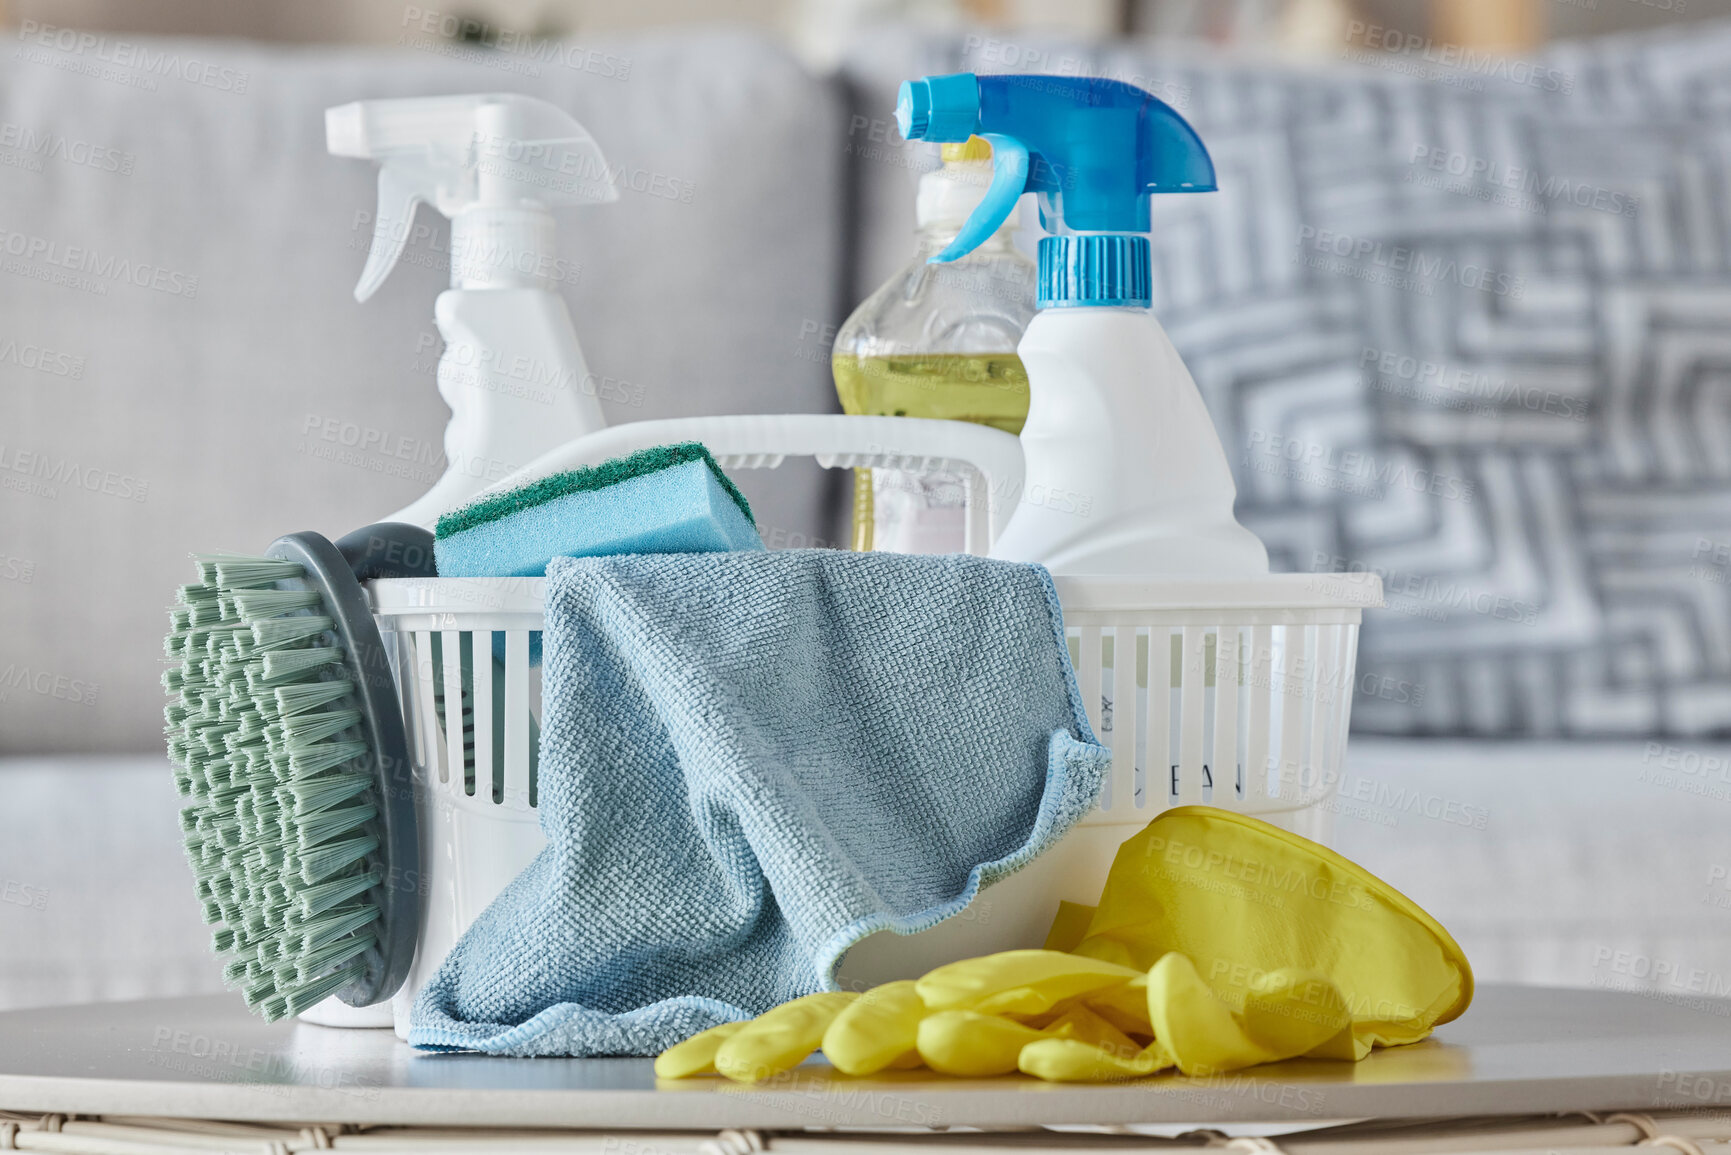 Buy stock photo Cleaning products, brush and basket on table in home living room for housekeeping. Hygiene, spring cleaning and cleaning supplies, gloves and chemicals for disinfection, germs or bacteria prevention.